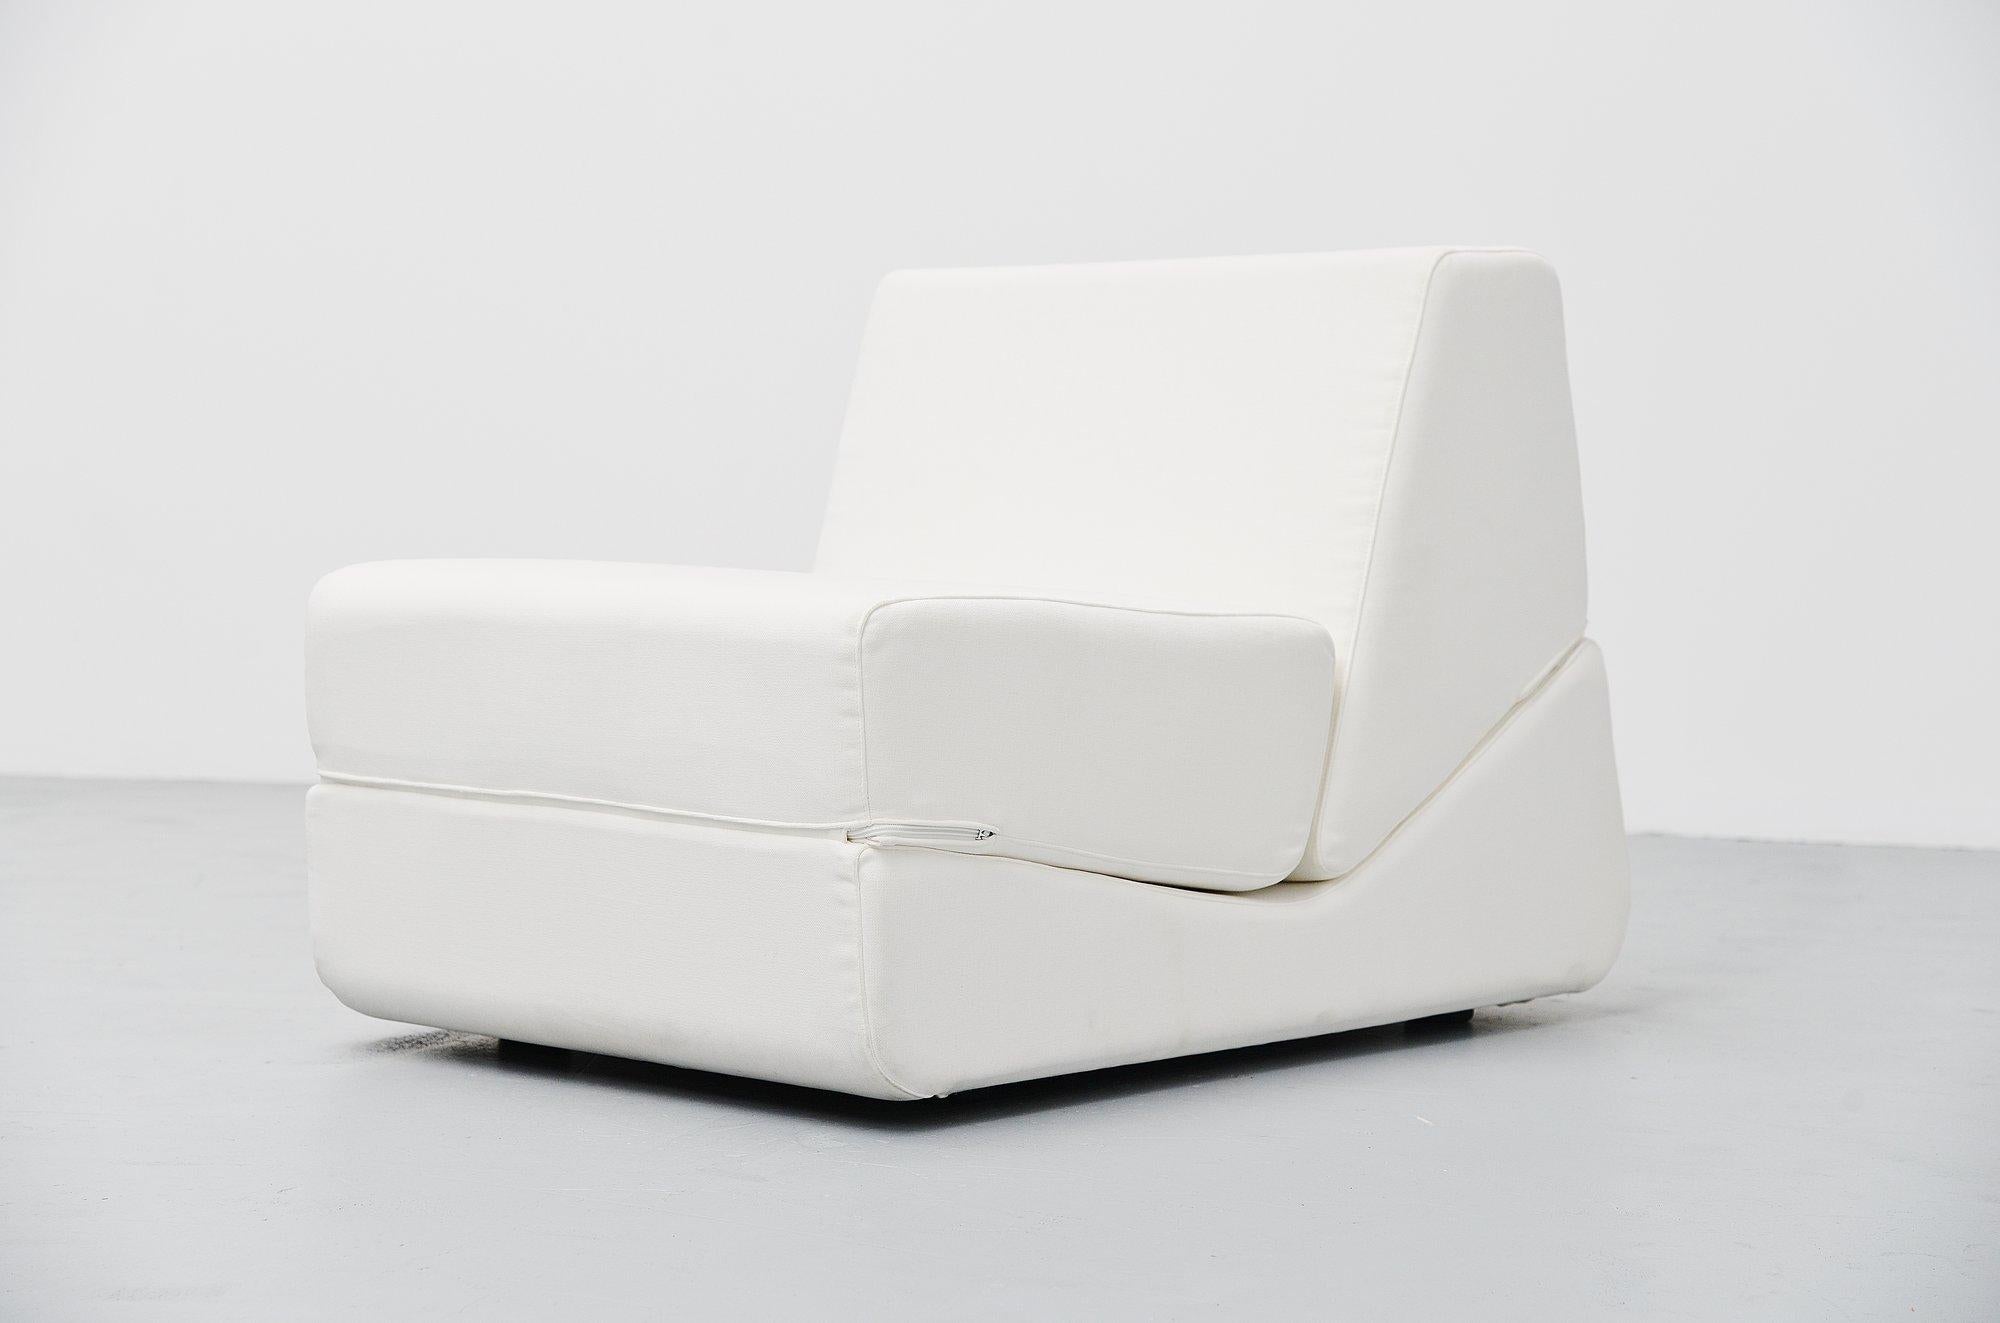 Fantastic multifunctional Galeotta lounge chair designed by De Pas, D’Urbino, Lomazzi and manufactured by BBB Emmebibonacina, Italy 1968. This is a lounge chair that can be easily turned into a chaise longue or a daybed. It is made with polyurethane